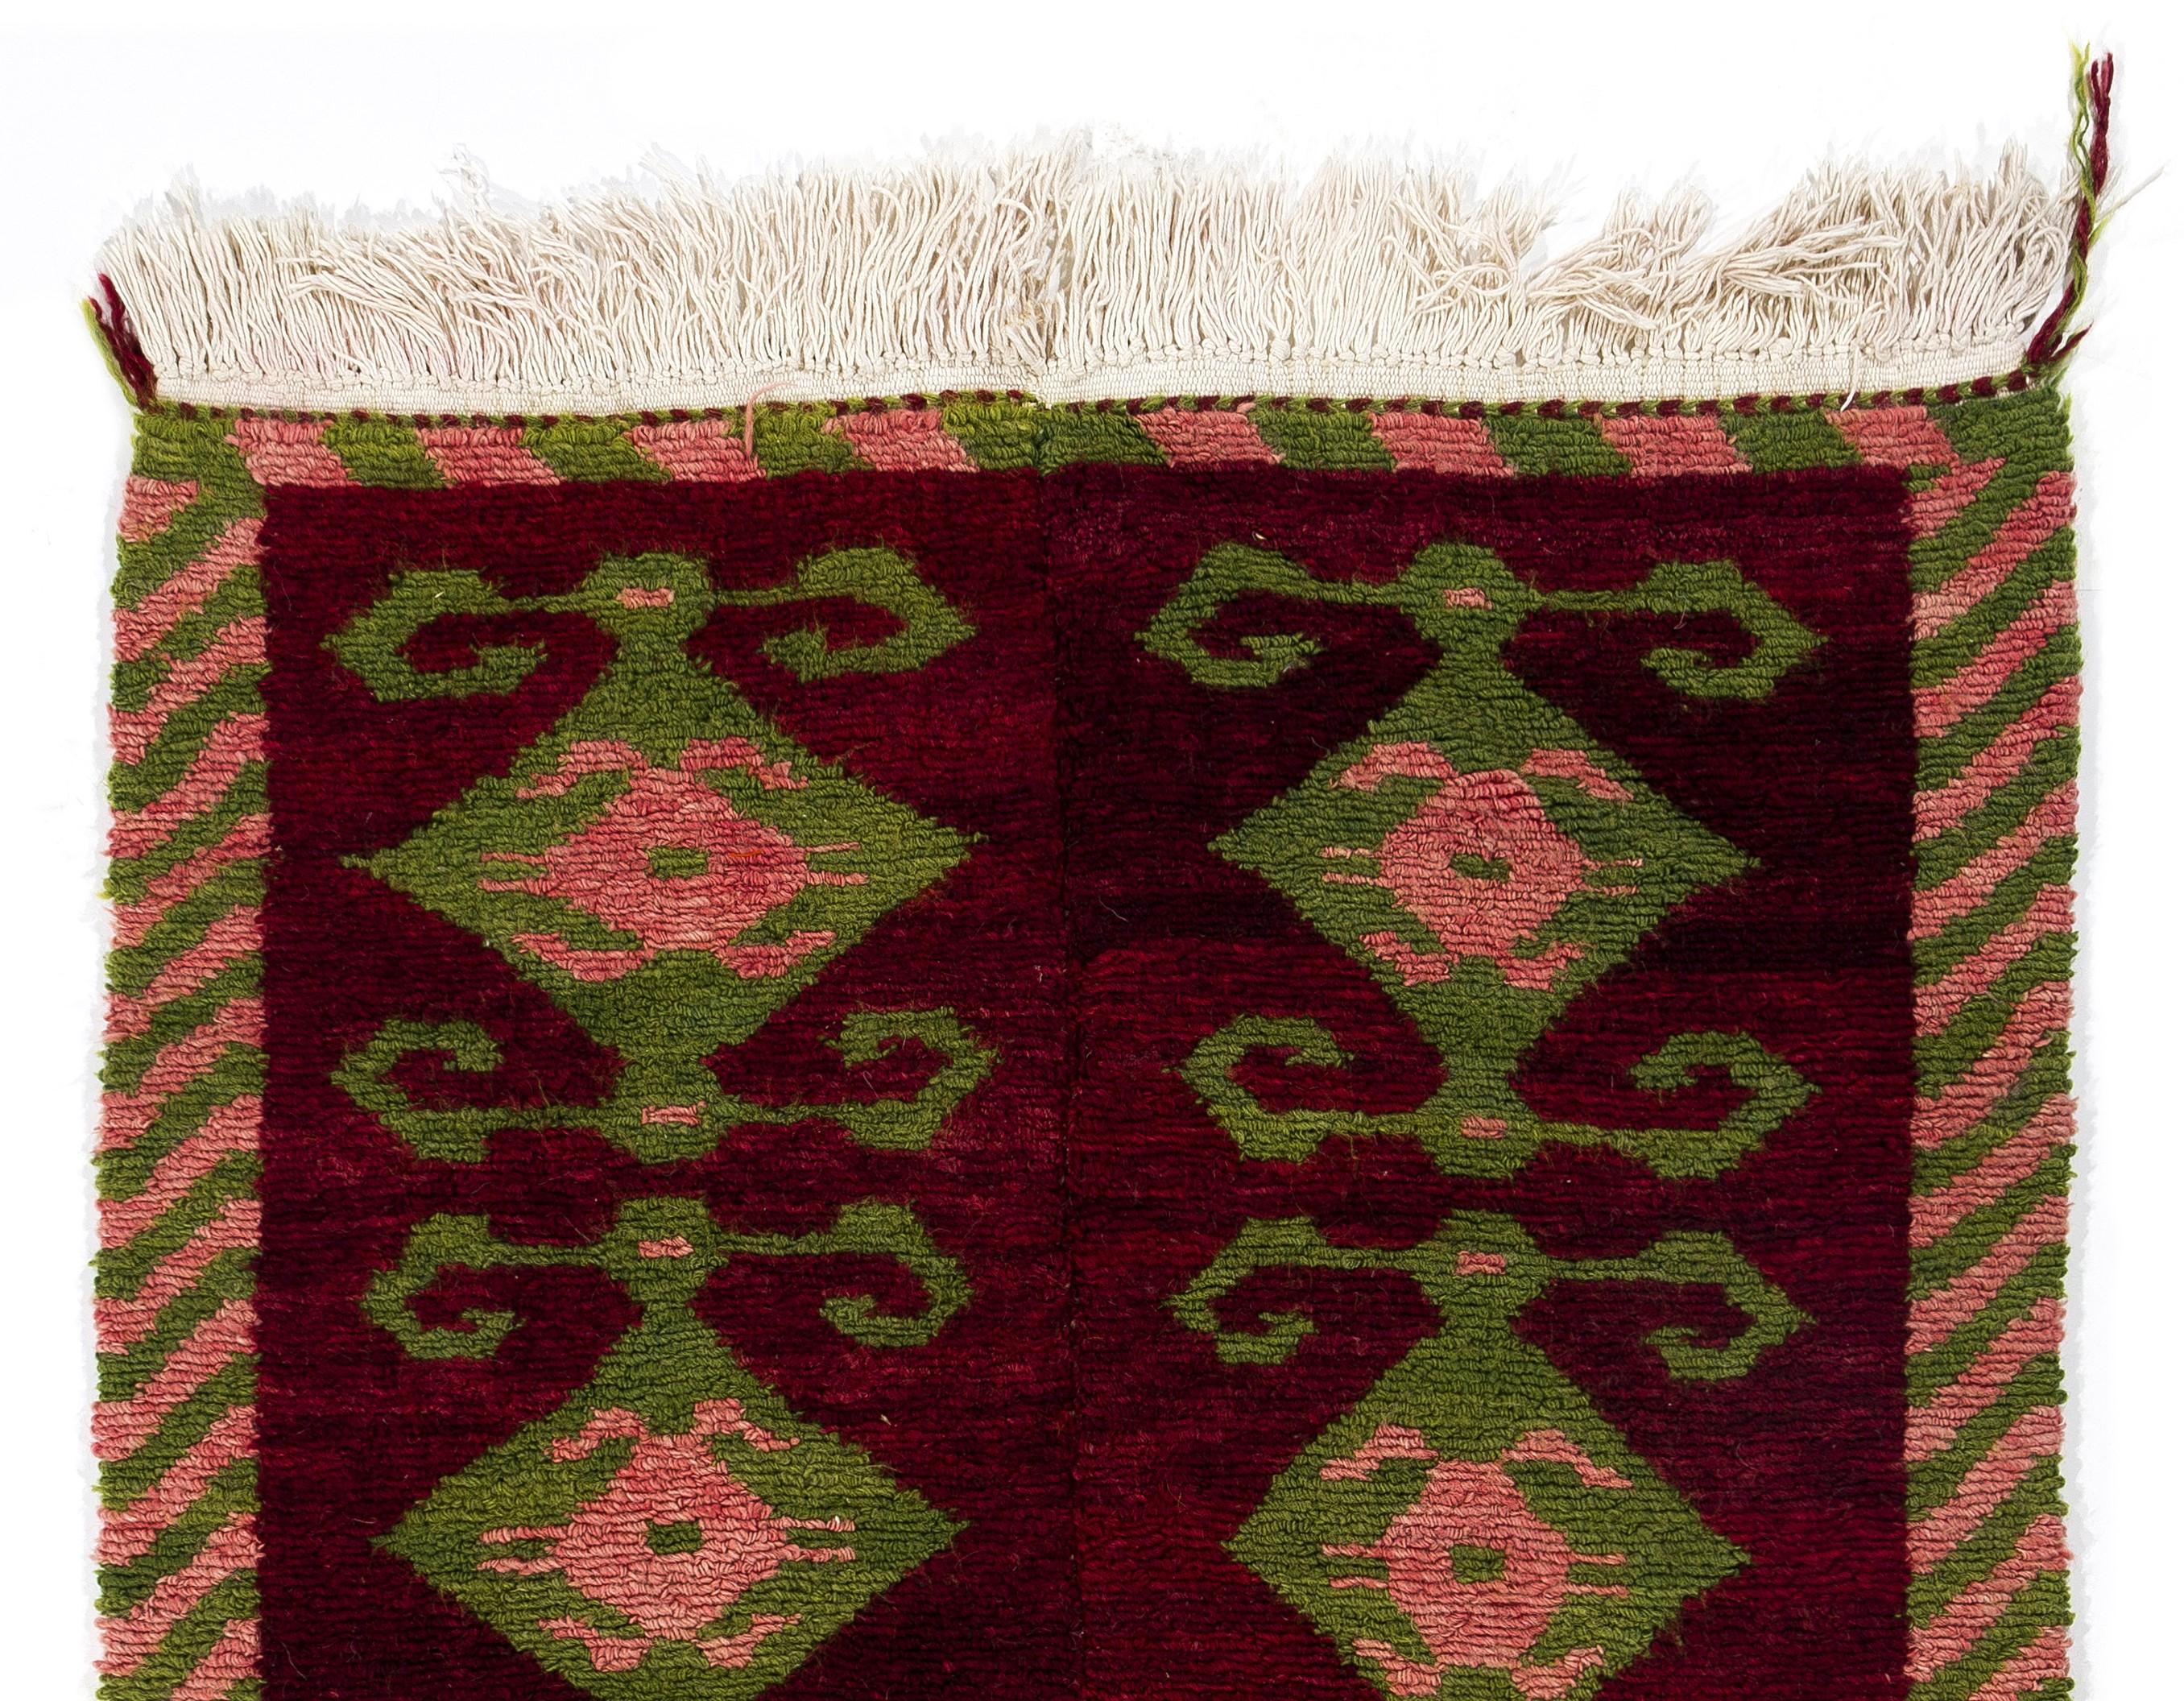 A vintage hand knotted Tulu (thick piled) rug from Konya in Central Turkey. The rug is made of hand-spun lamb’s wool, is very soft and feels comfortable under your feet. It has a lively color palette of deep ruby red, grass green and french rose